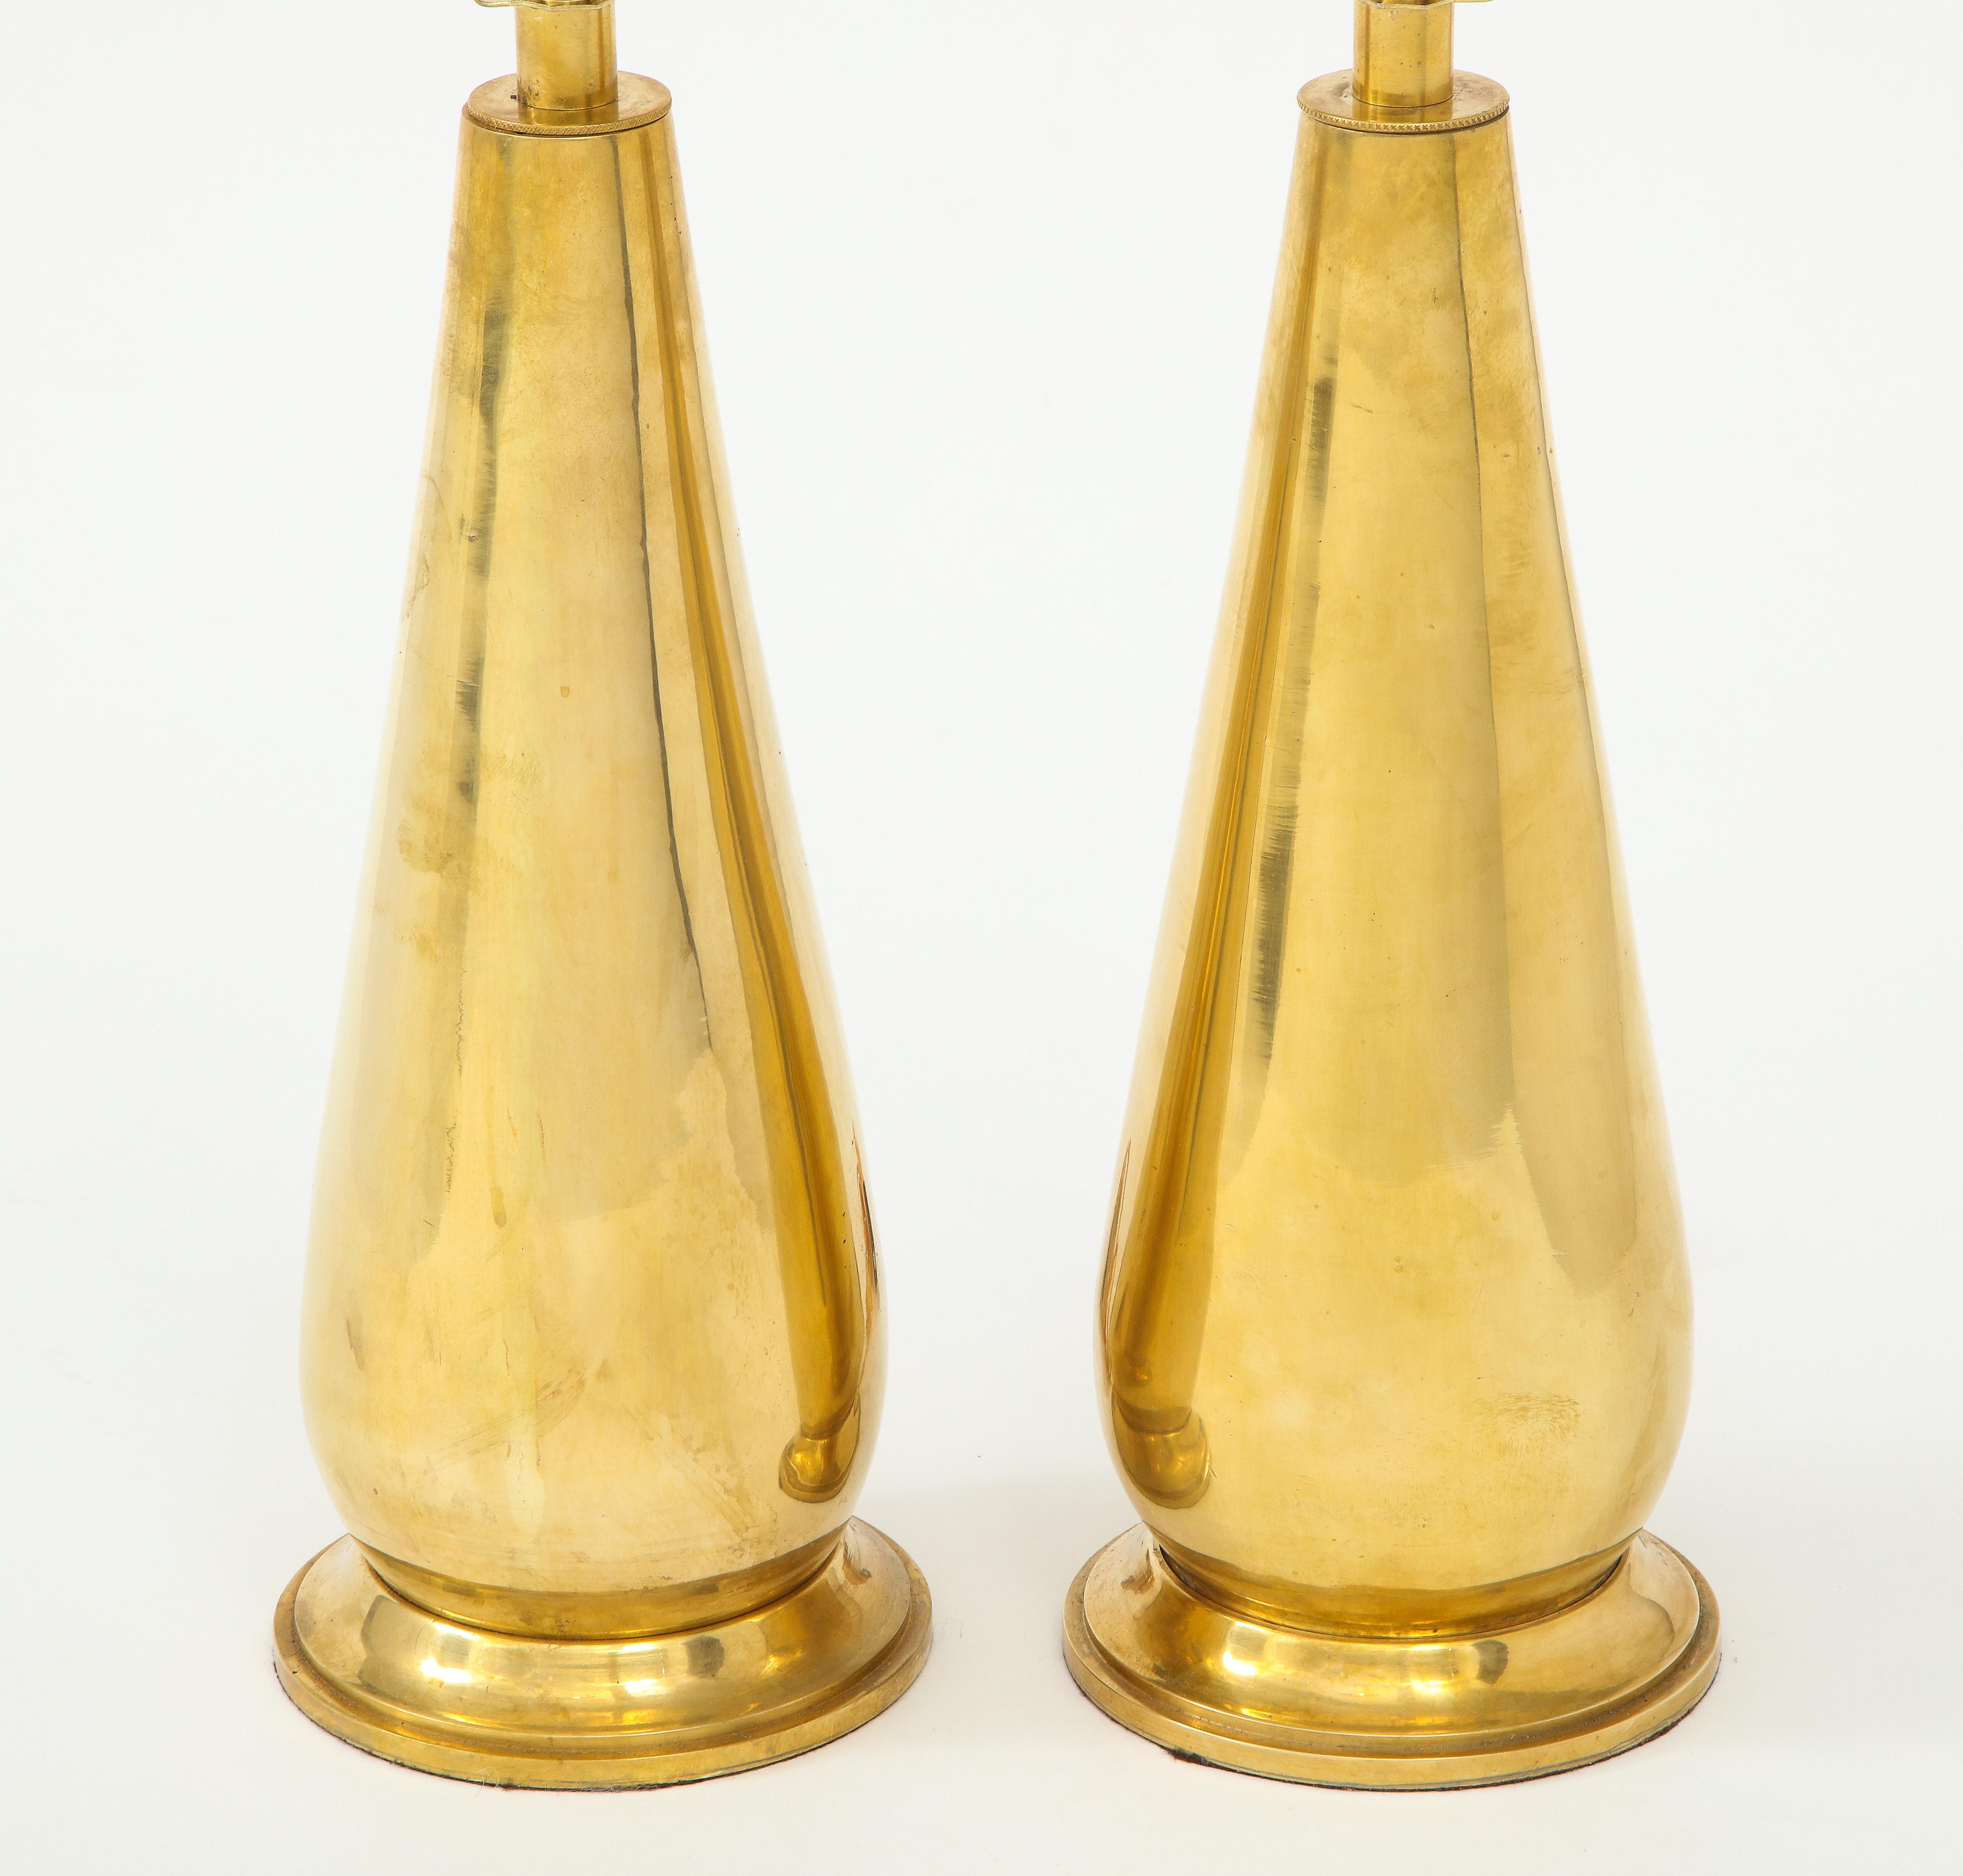 A stunning pair of brass lamps in a sleek teardrop shape on a brass base. Their vintage age gives them a lovely patina--a wonderful way to add a bit of shine and warmth to a room!